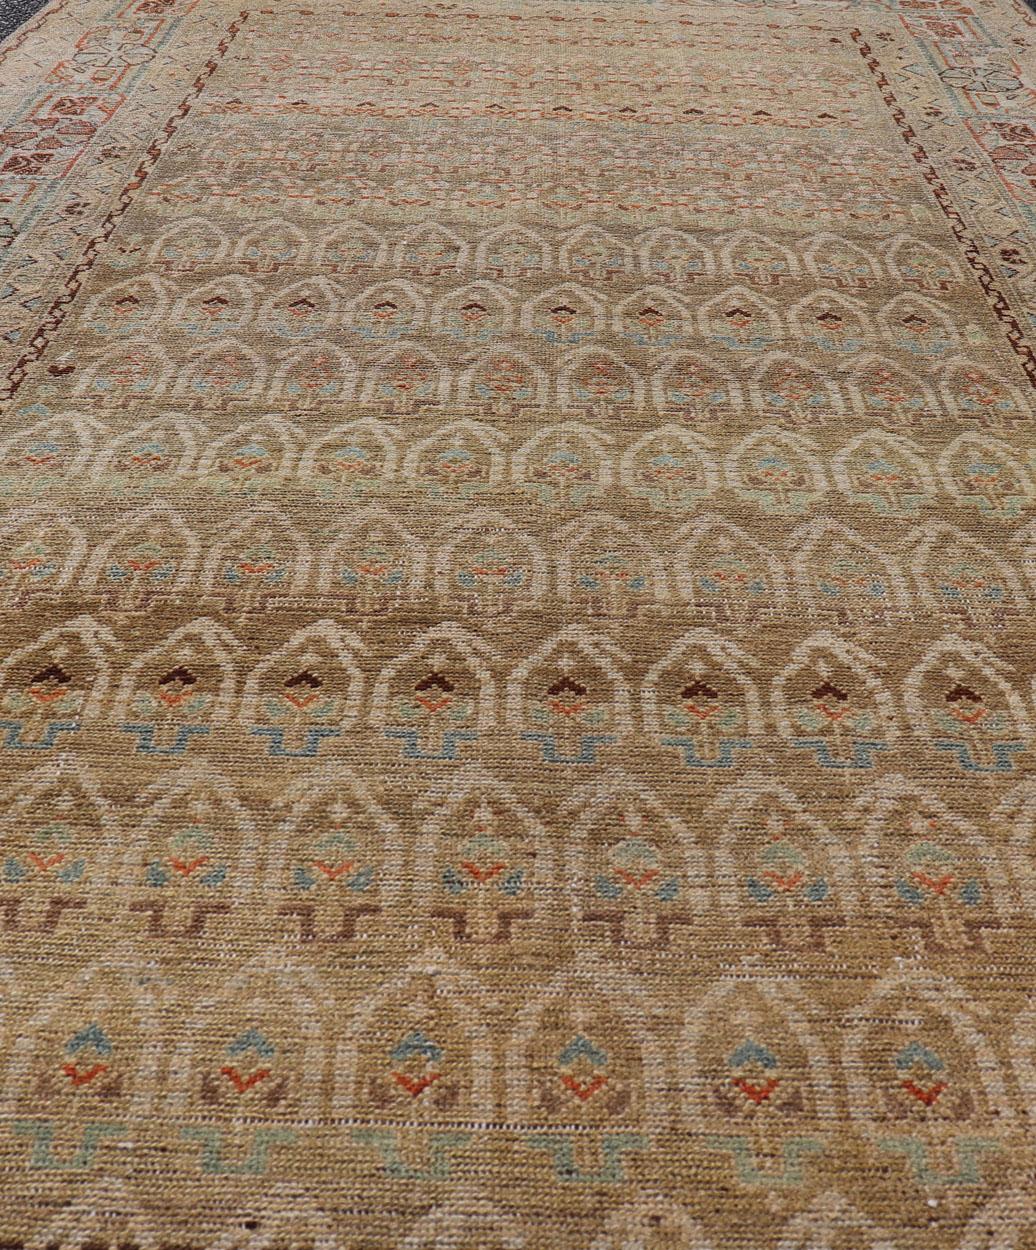 20th Century Antique Hamadan Gallery Rug in Wool with All-Over Sub-Geometric Paisley Design